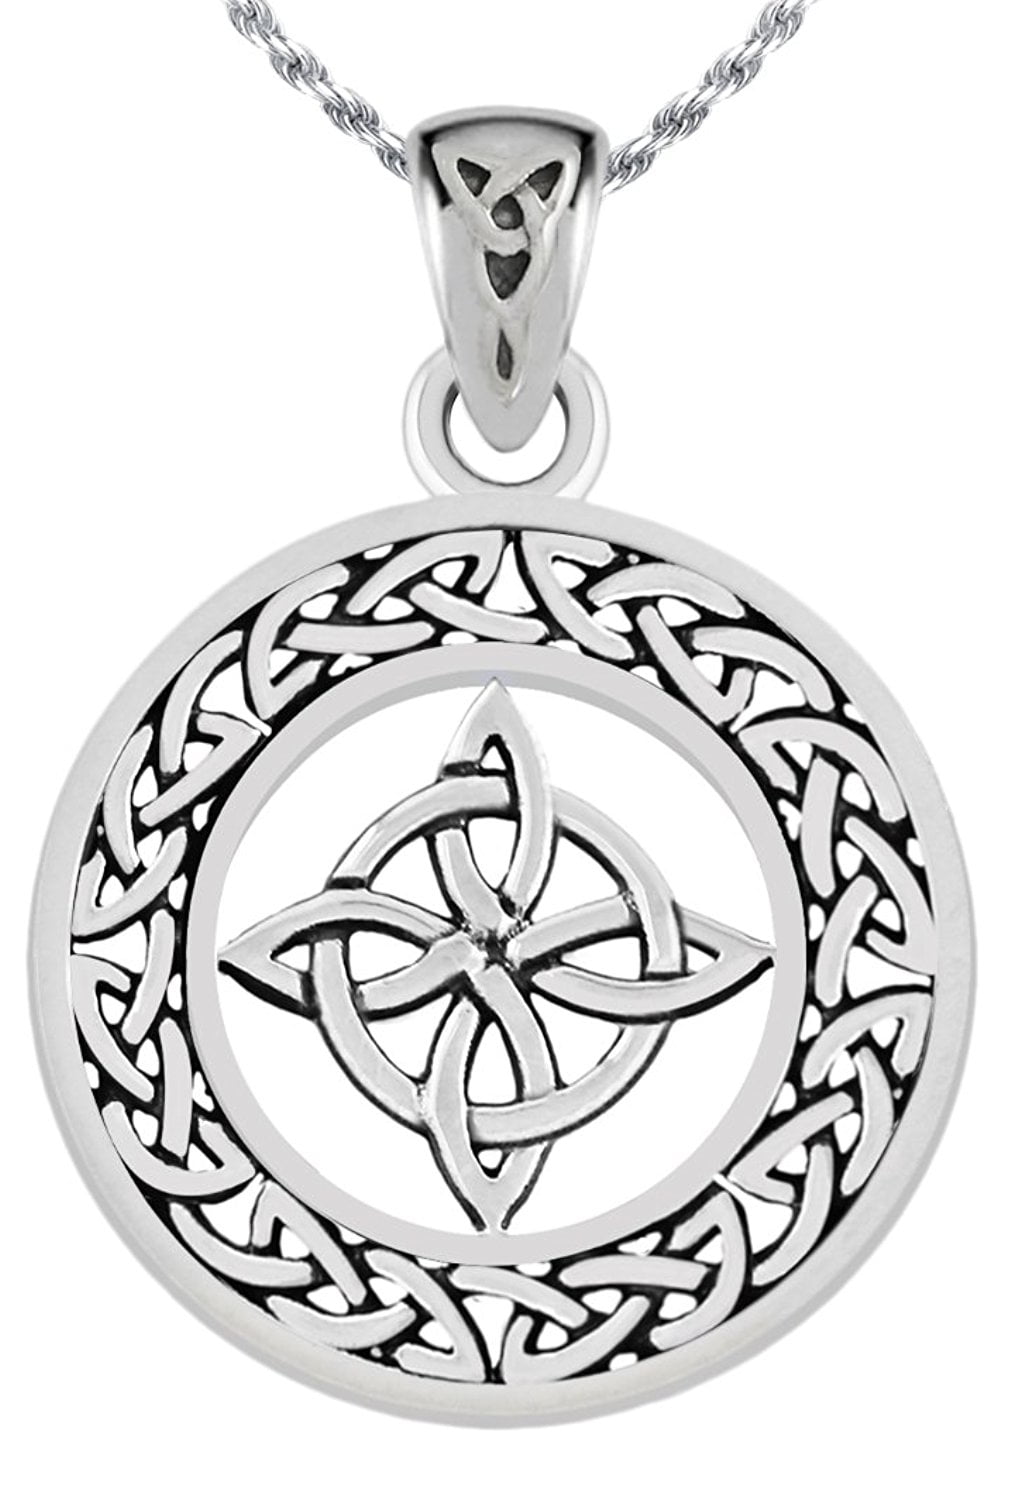 US Jewels New 0.925 Sterling Silver Flying Owl with Pentagram Wiccan Pendant Necklace